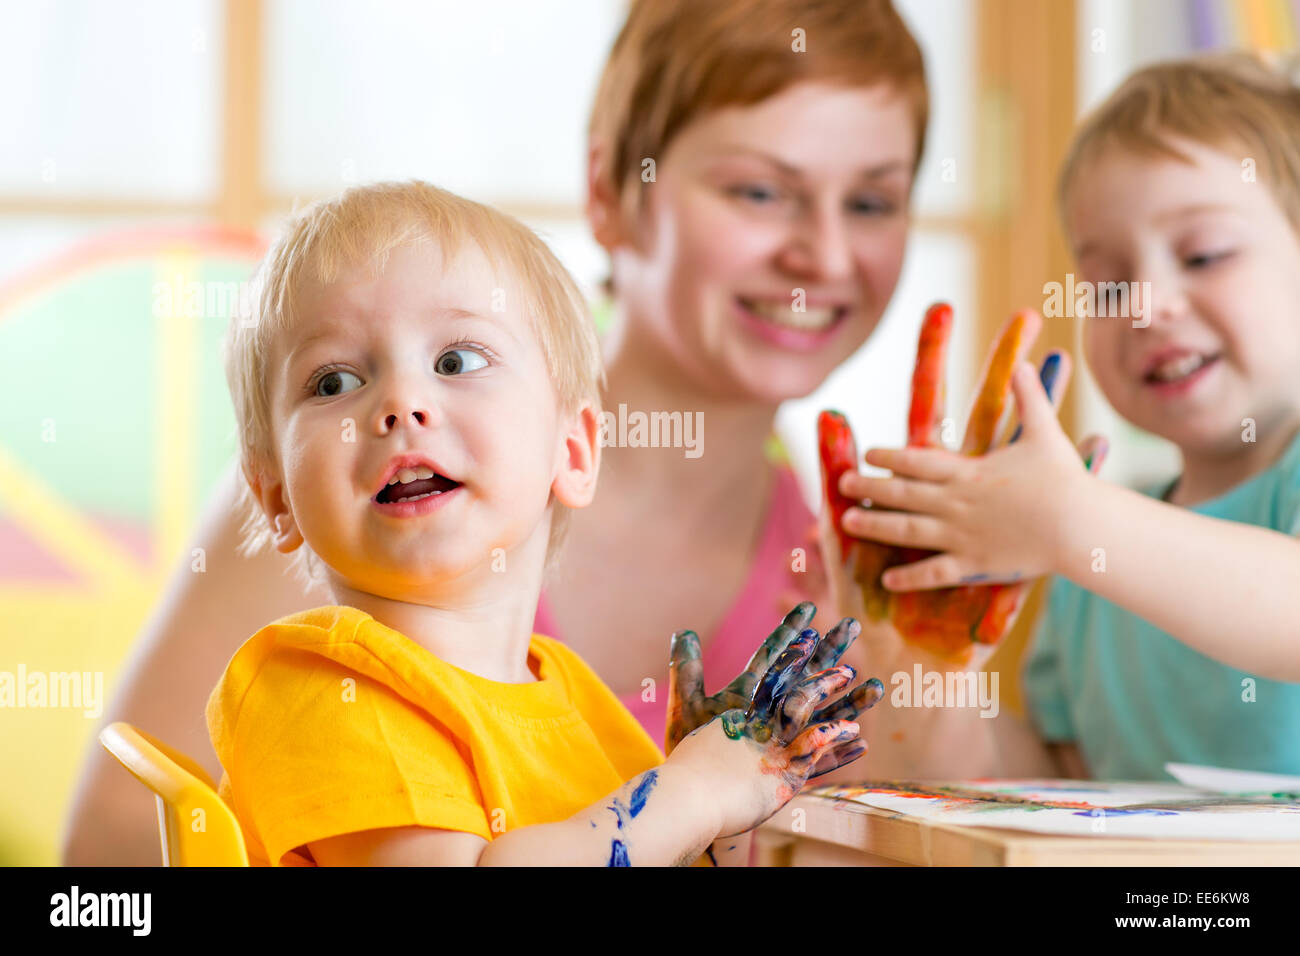 Cute woman playing and painting with children Stock Photo